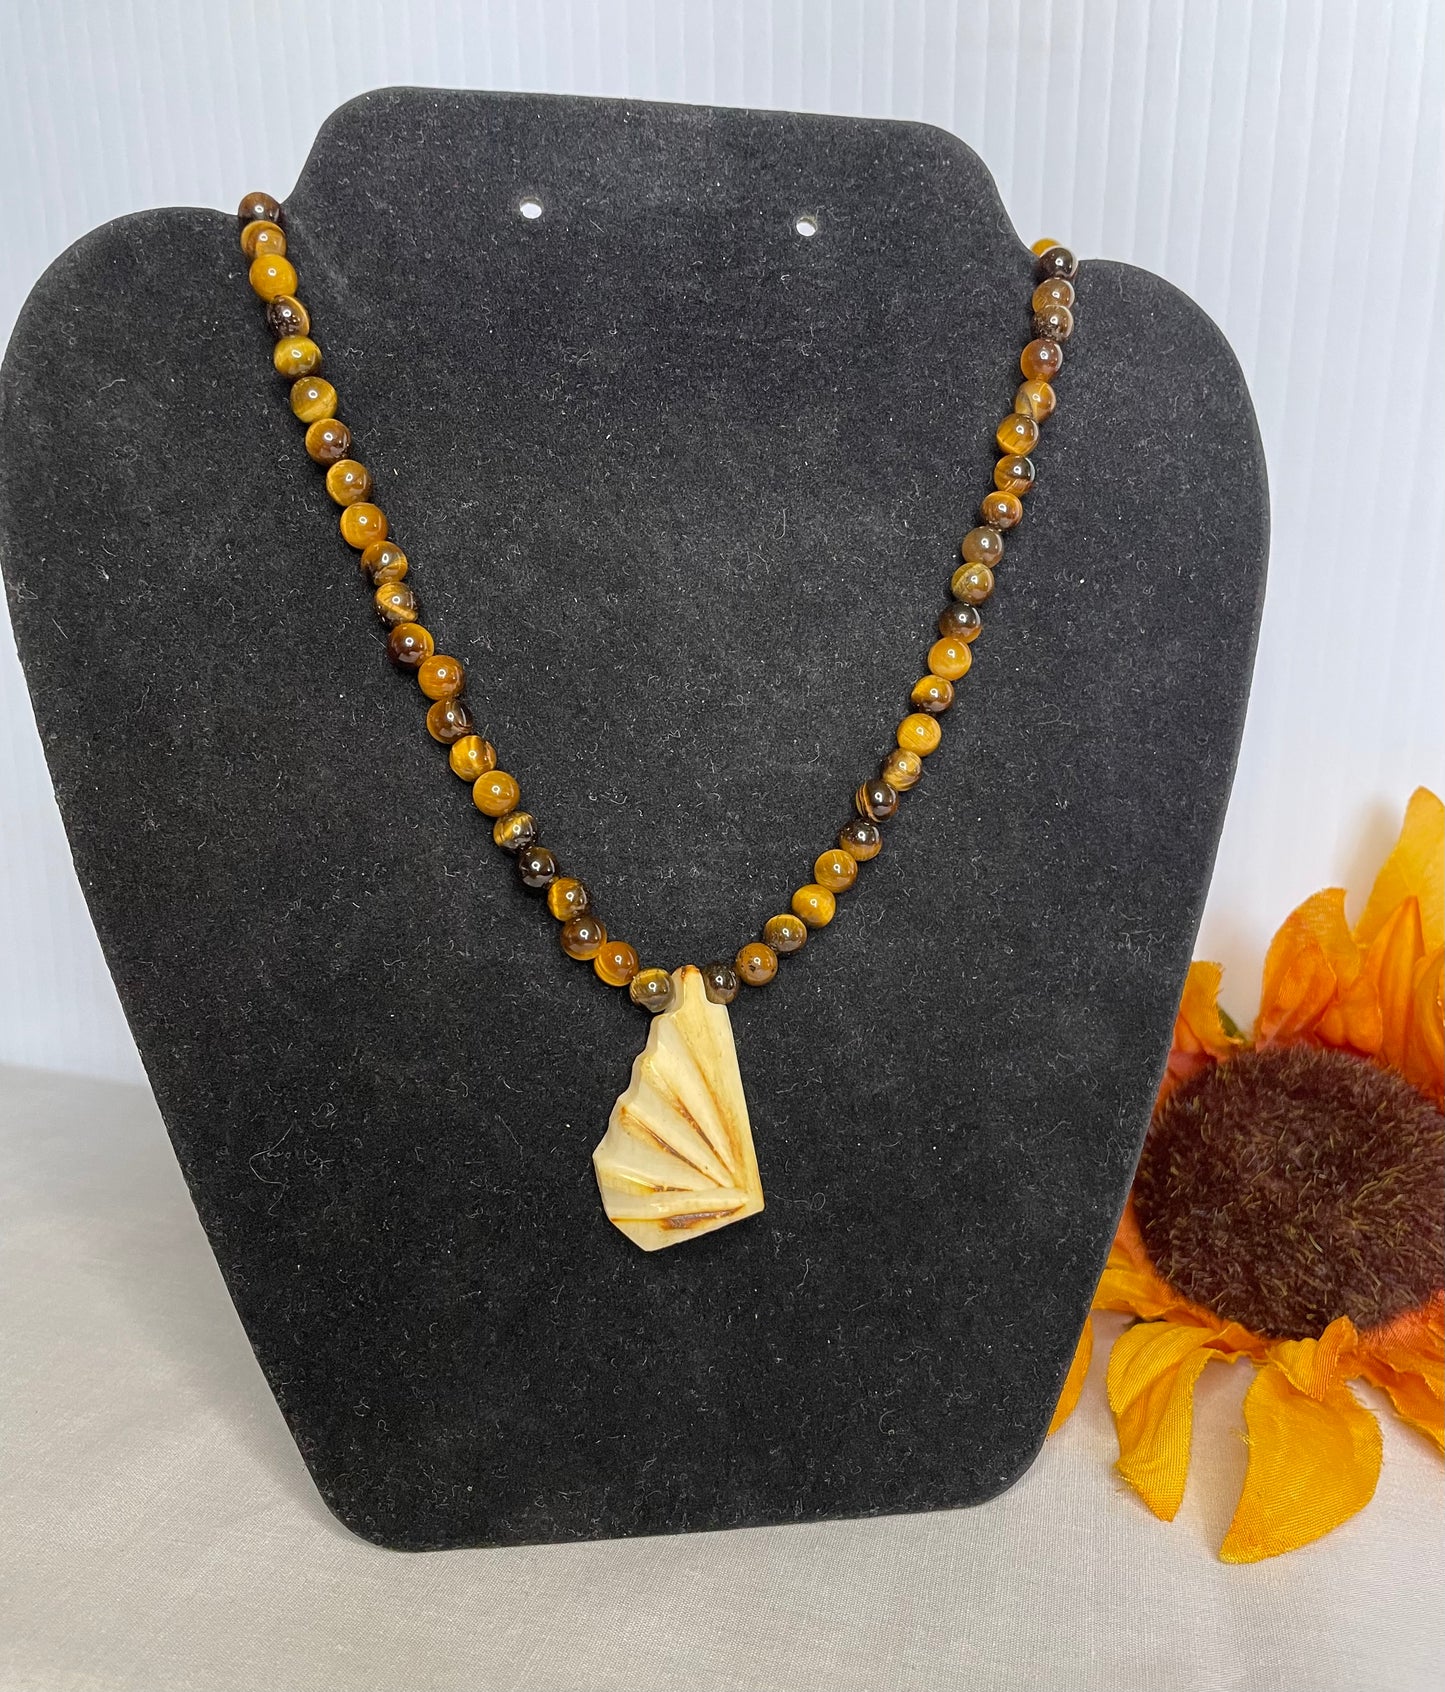 Tiger Eye Stones w/Carved Ivory Pendant, Healing Necklace.